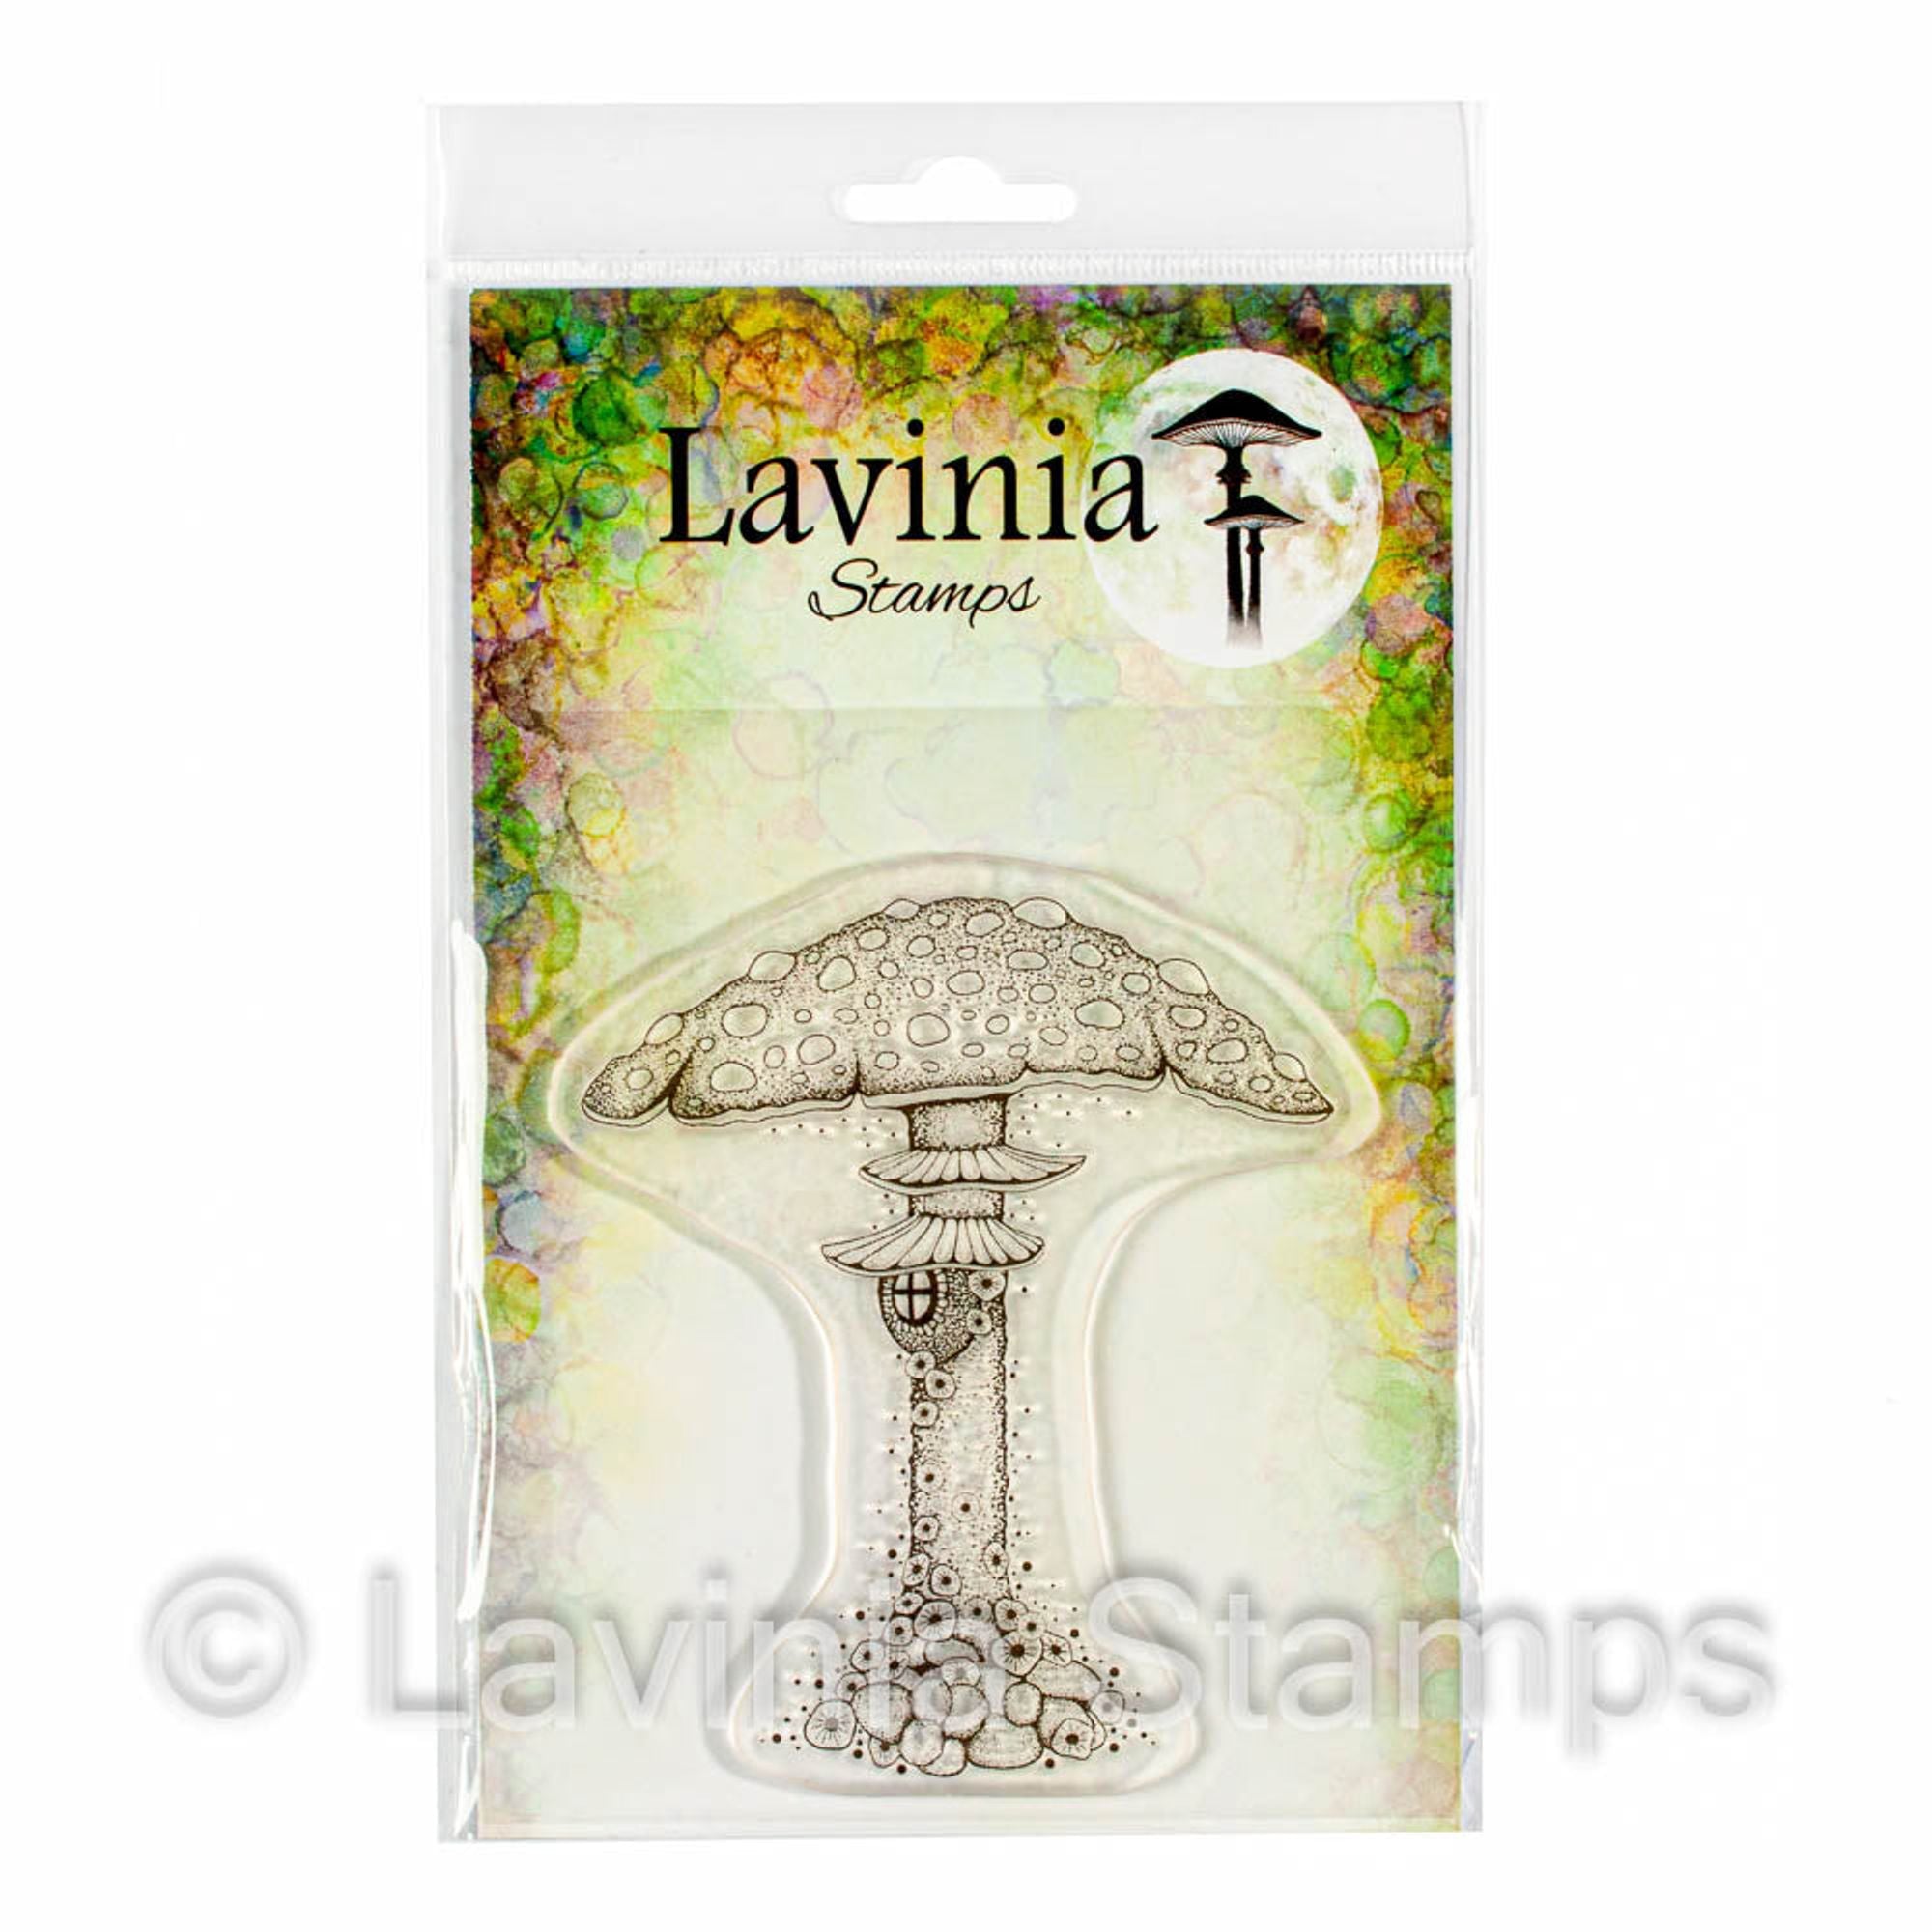 Lavinia Stamps - Forest Cap Toadstool